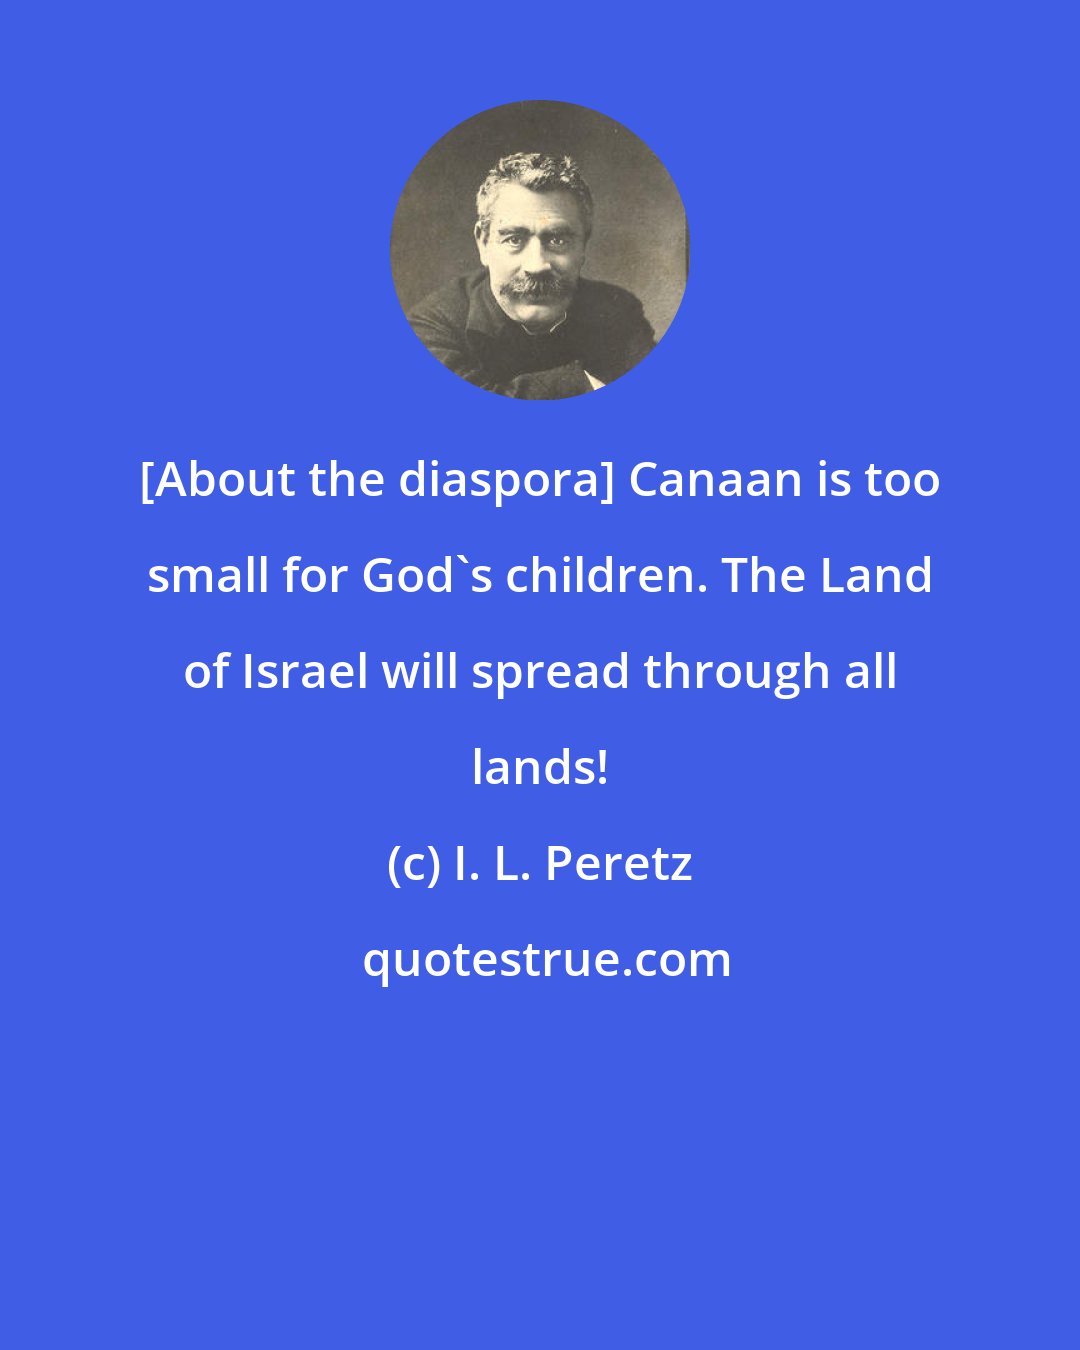 I. L. Peretz: [About the diaspora] Canaan is too small for God's children. The Land of Israel will spread through all lands!